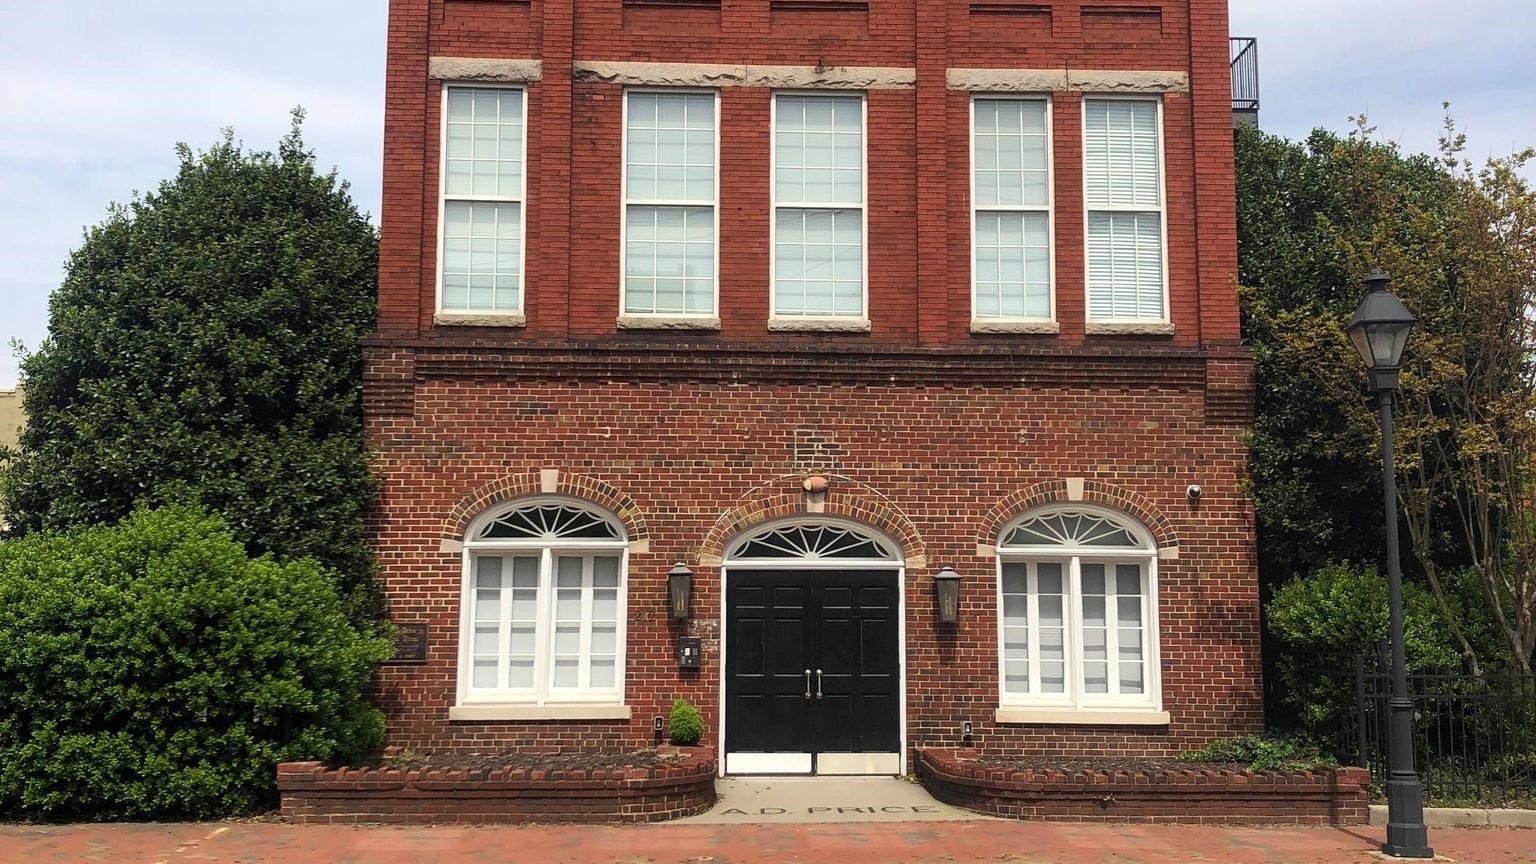 3-story red Brick building, trees on both sides, white window frames 